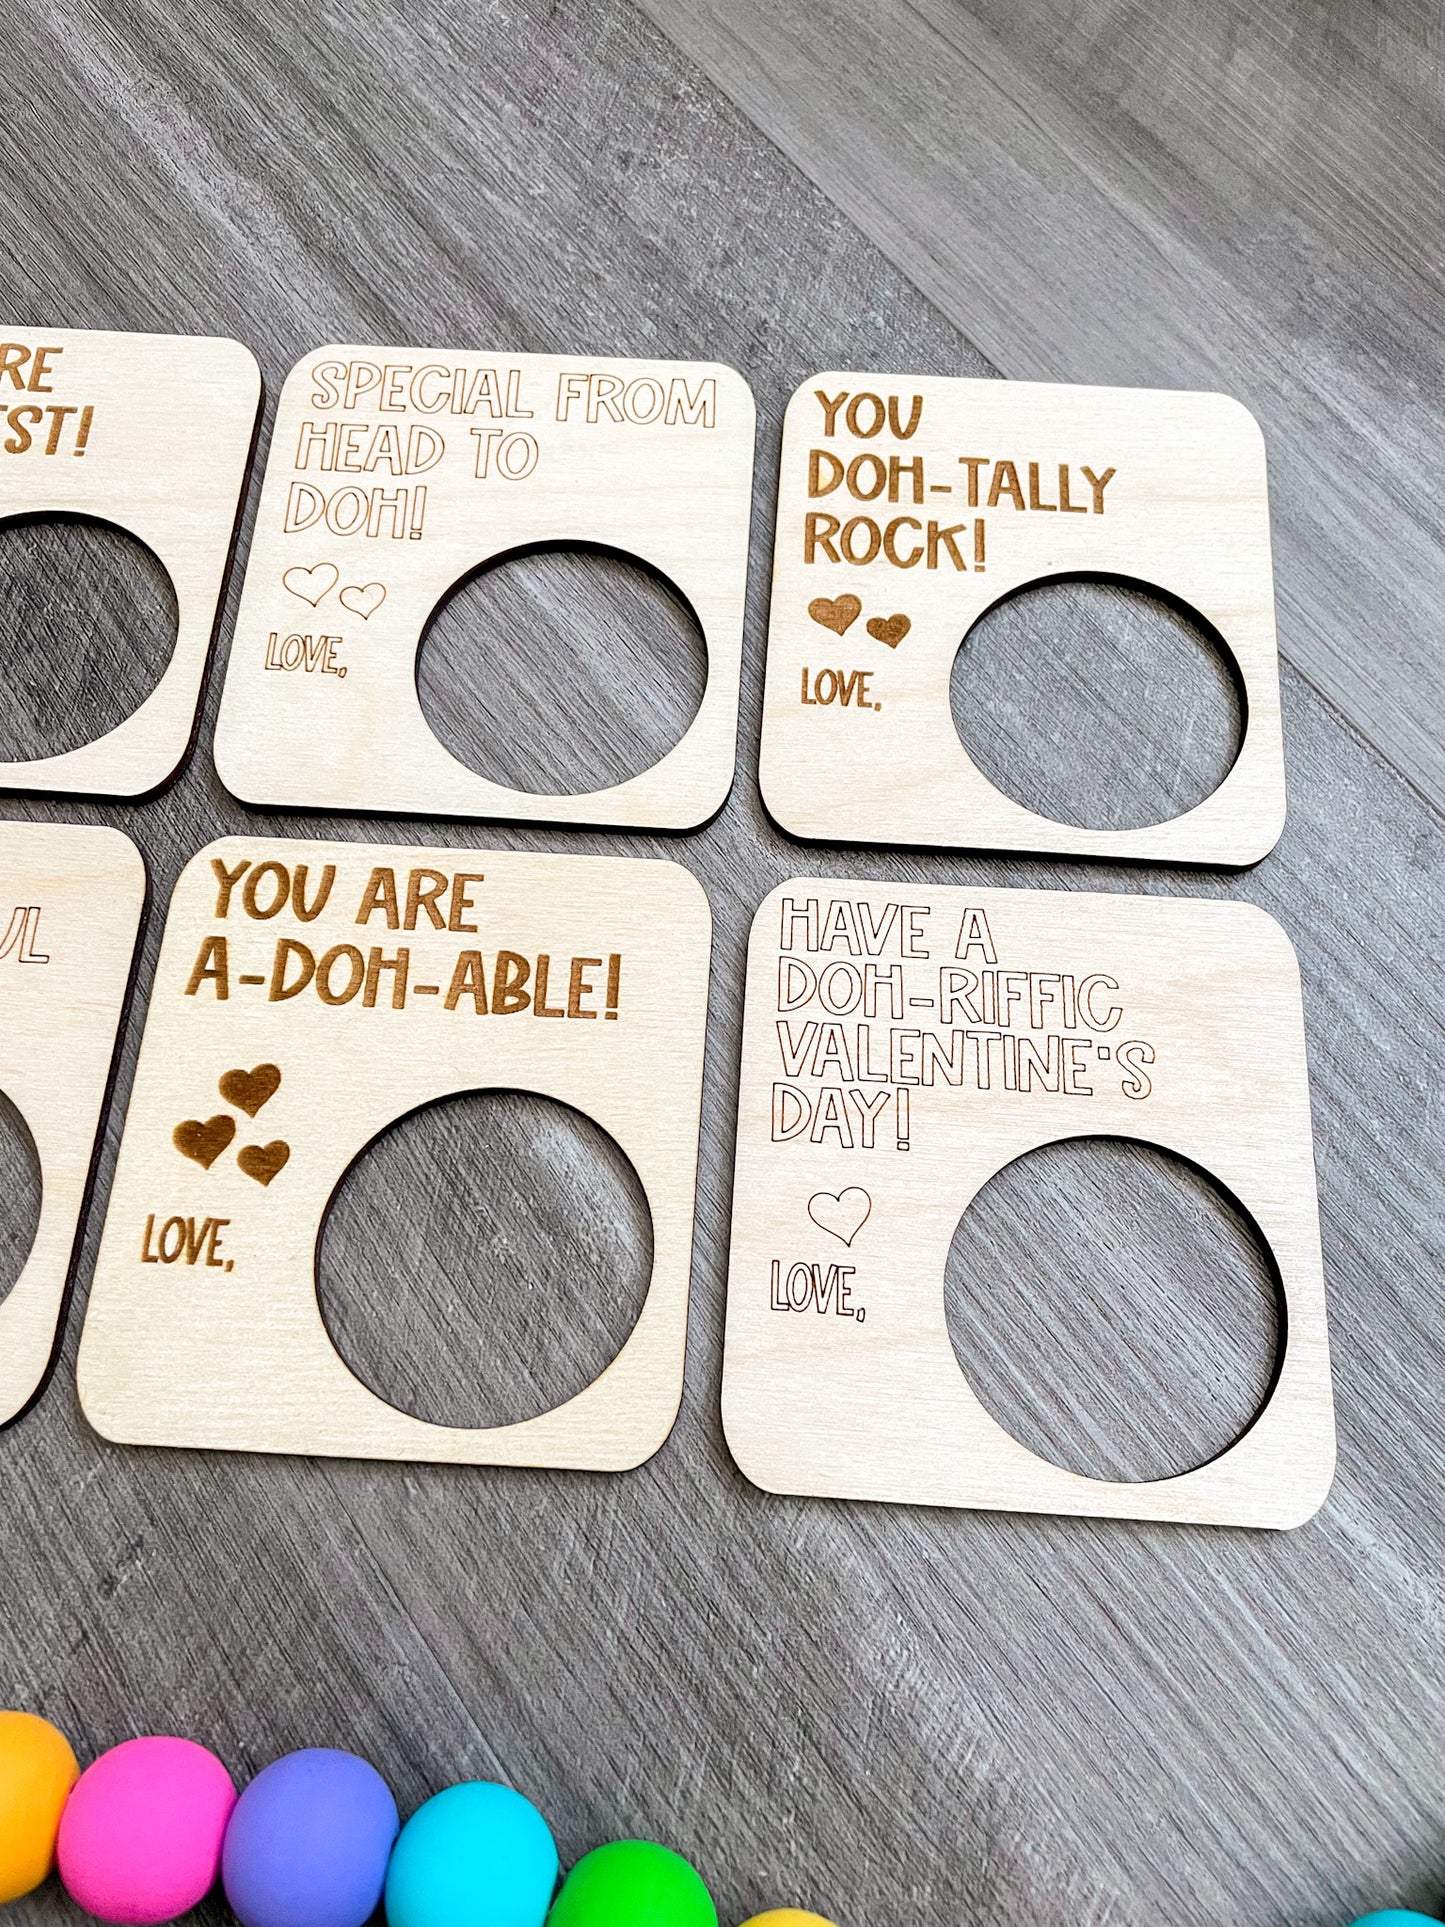 Personalized Playdough Valentines Day Cards Set of 8 | Wood | Laser Engraved and Cut